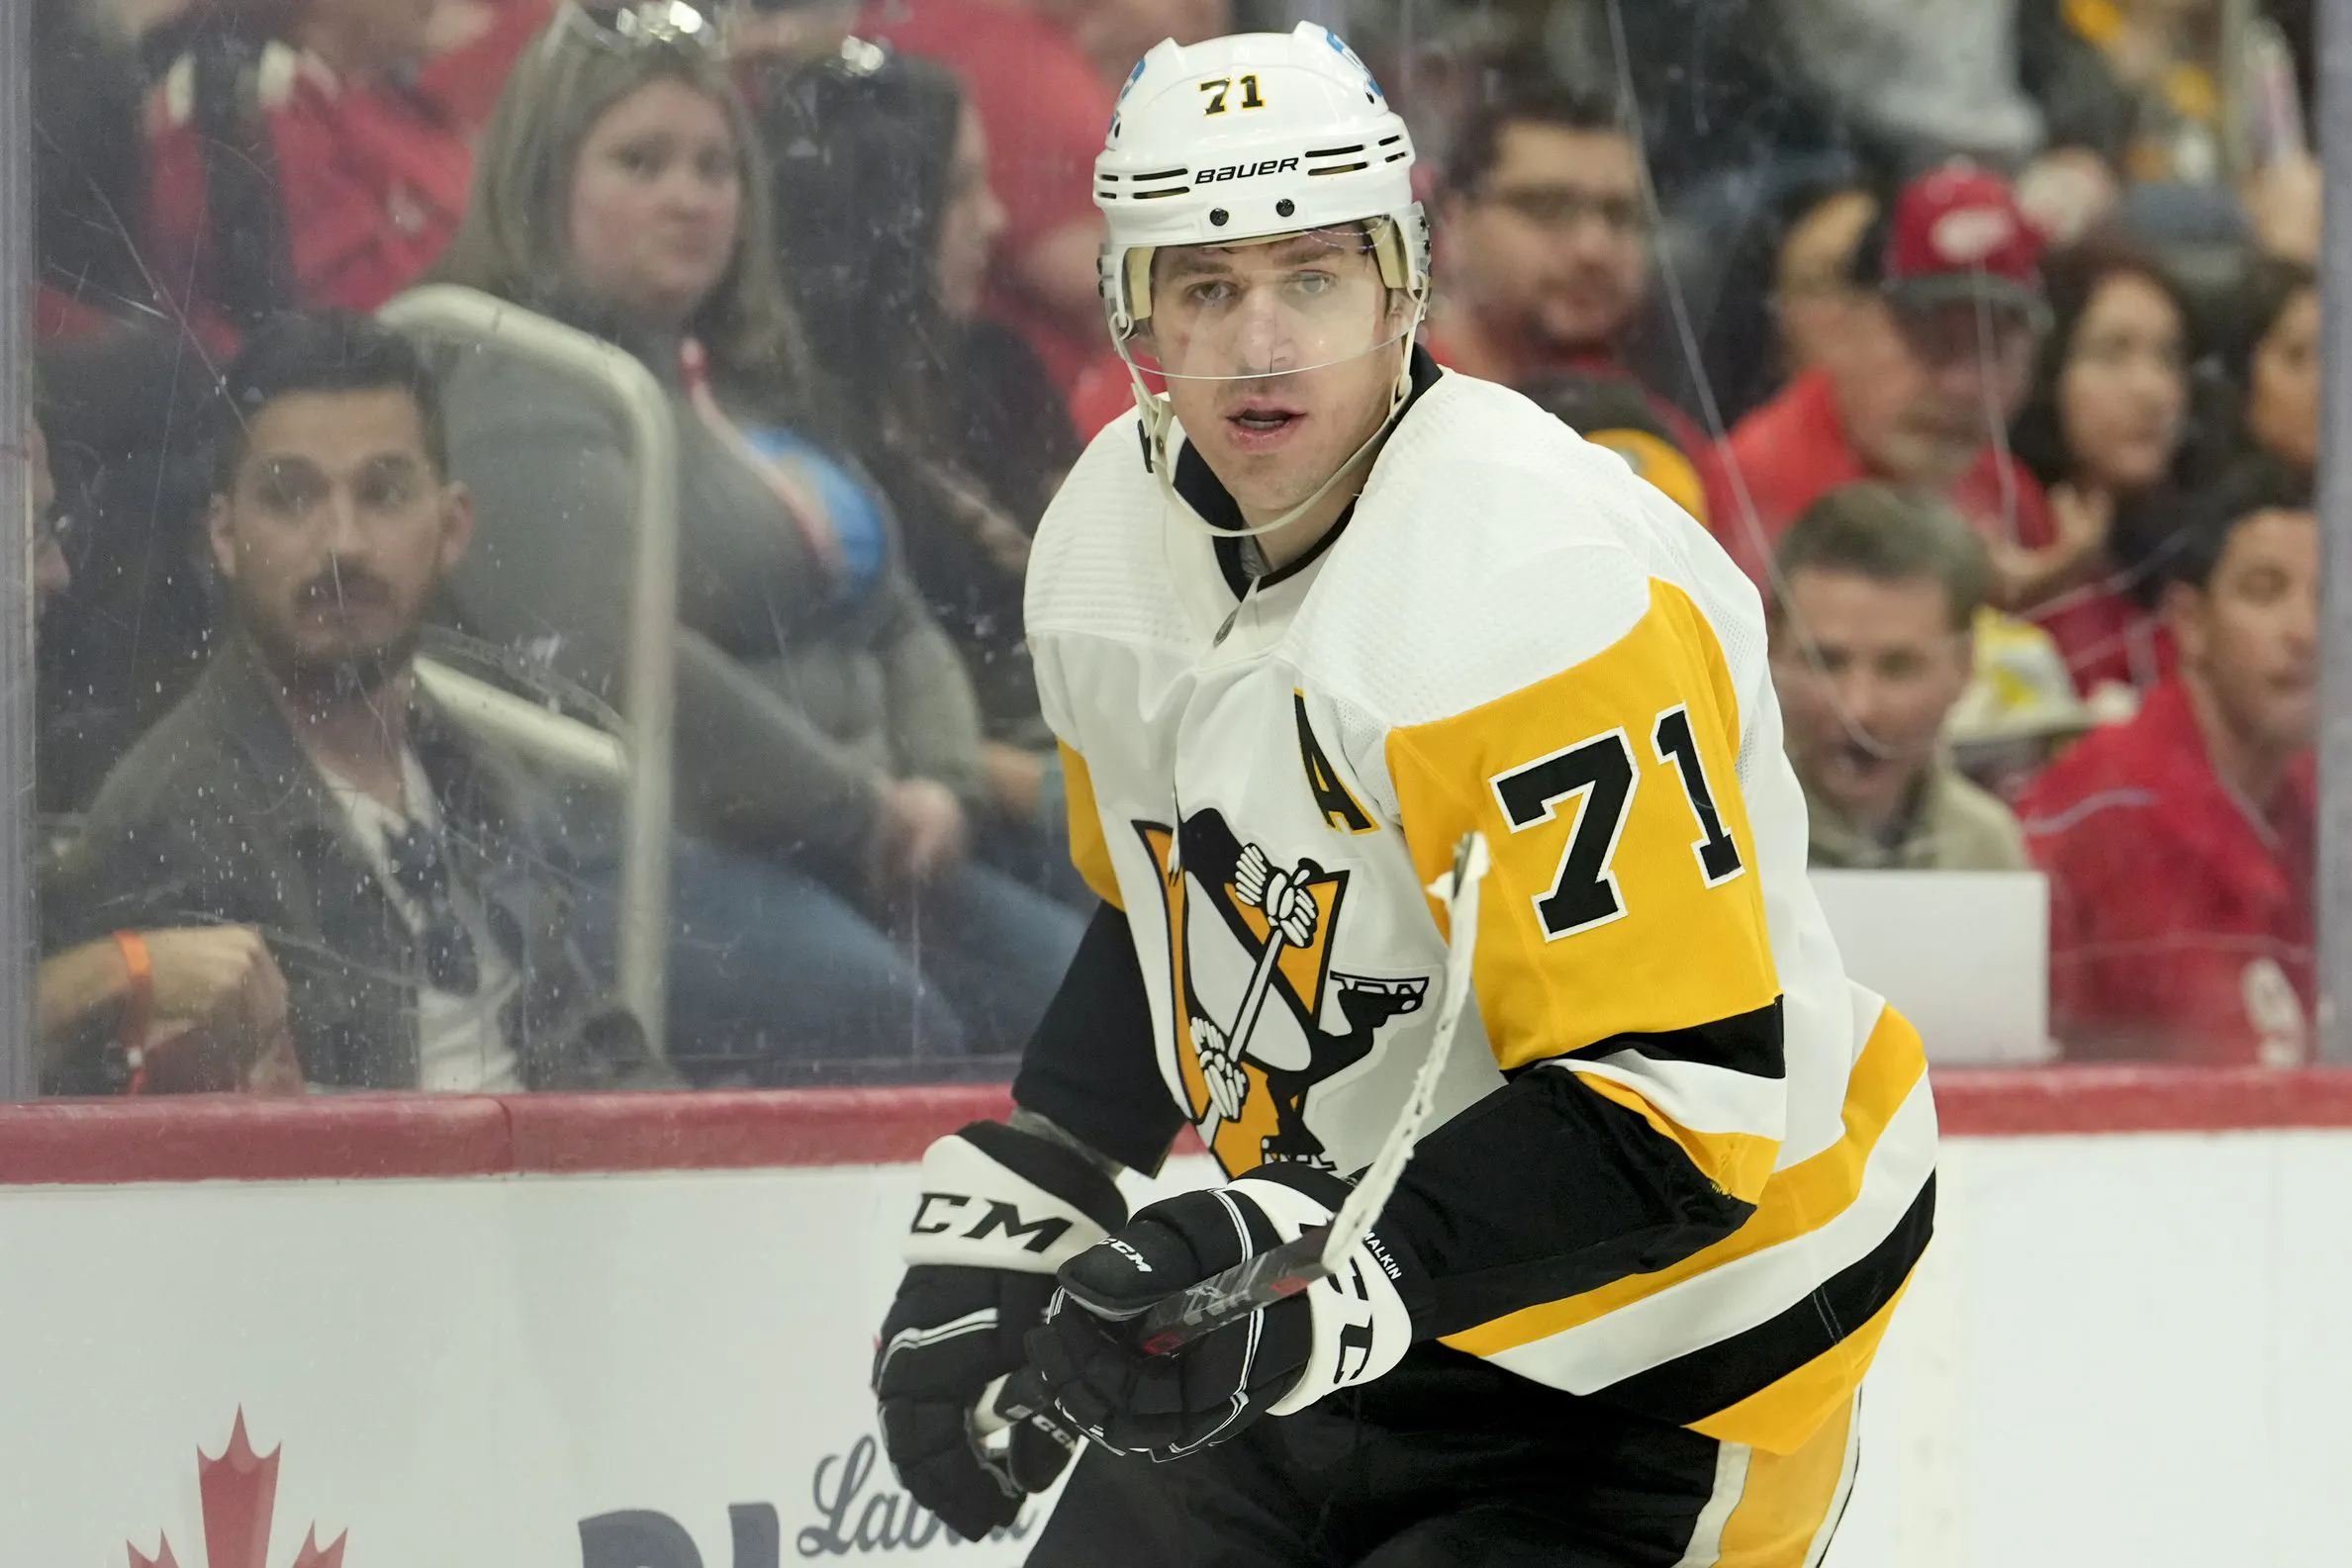 Pittsburgh Penguins re-sign Evgeni Malkin to four-year deal carrying $6.1 million cap hit